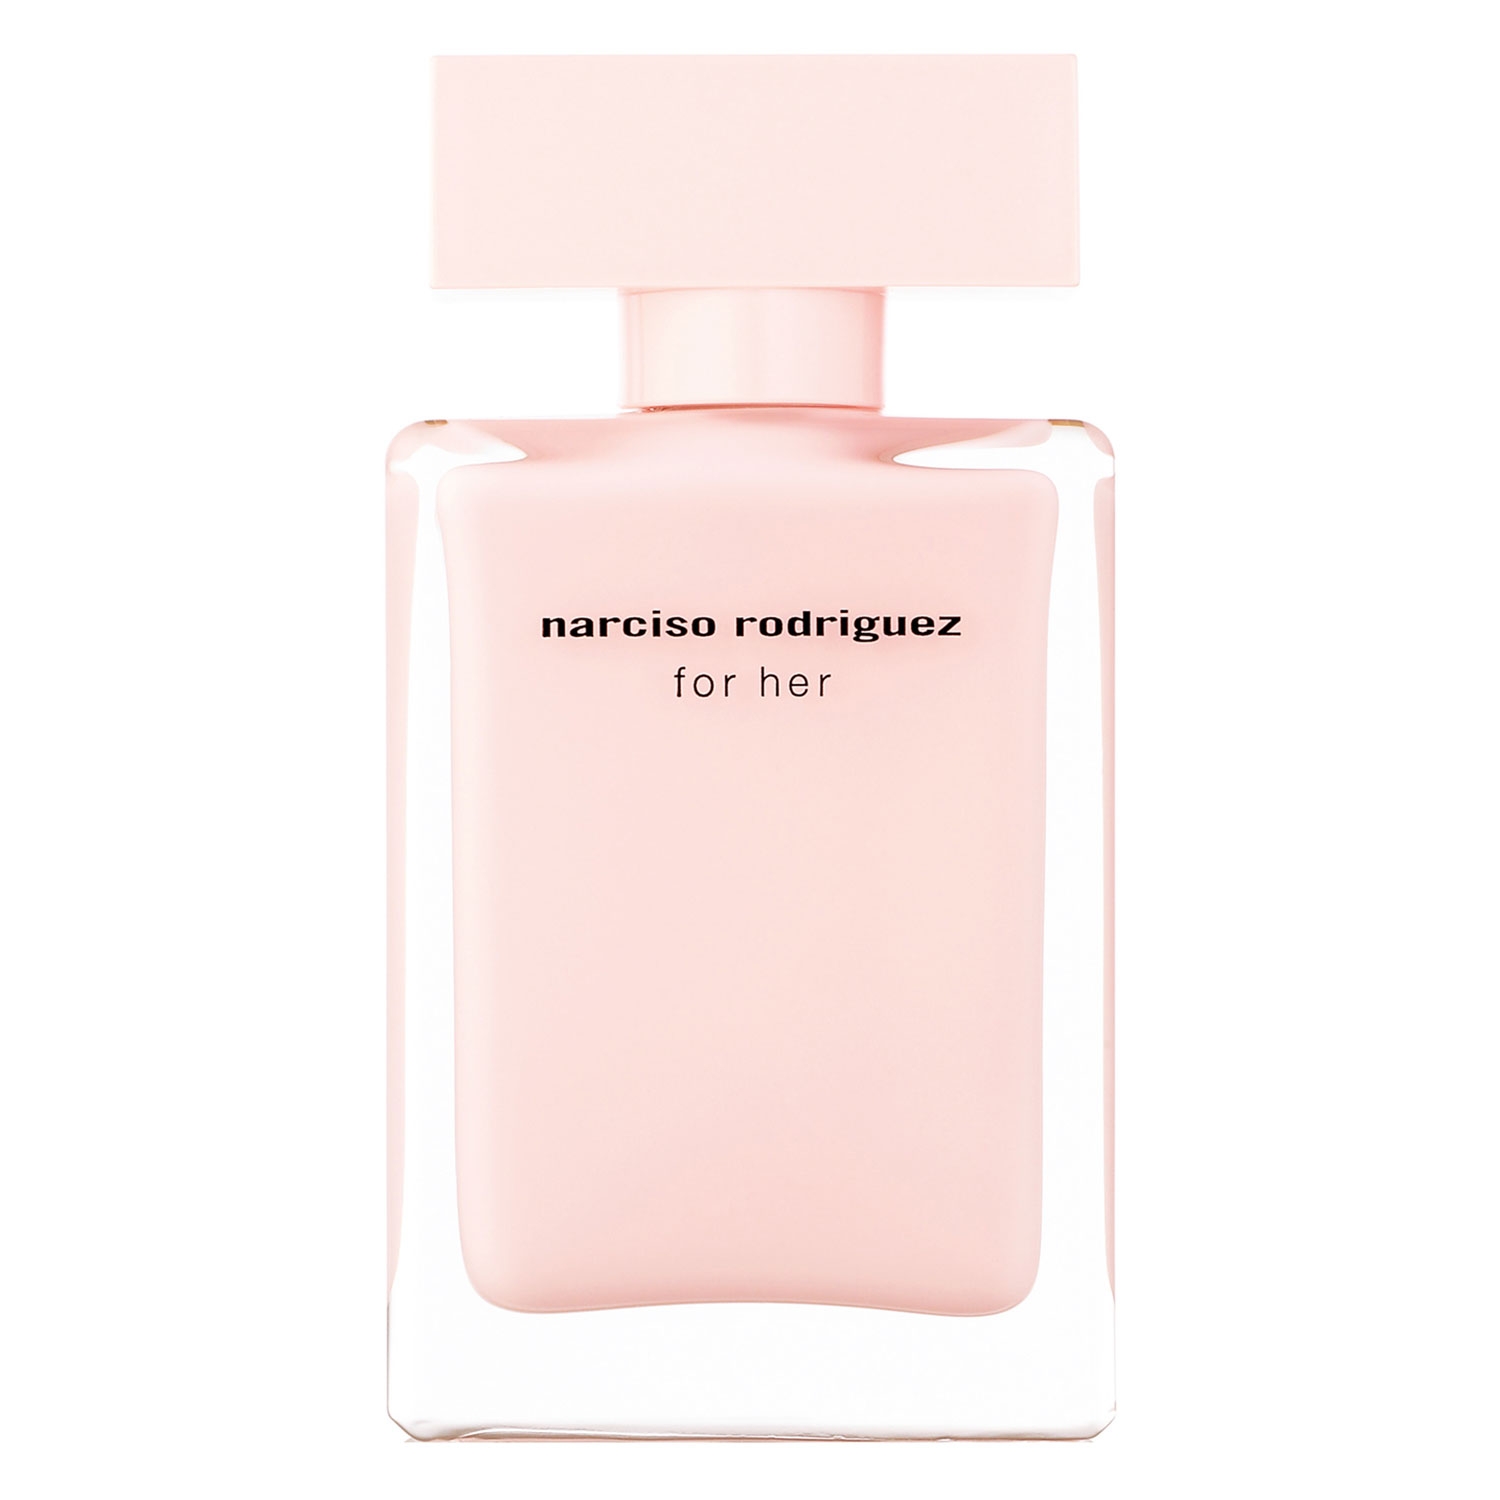 Product image from Narciso - For Her Eau de Parfum